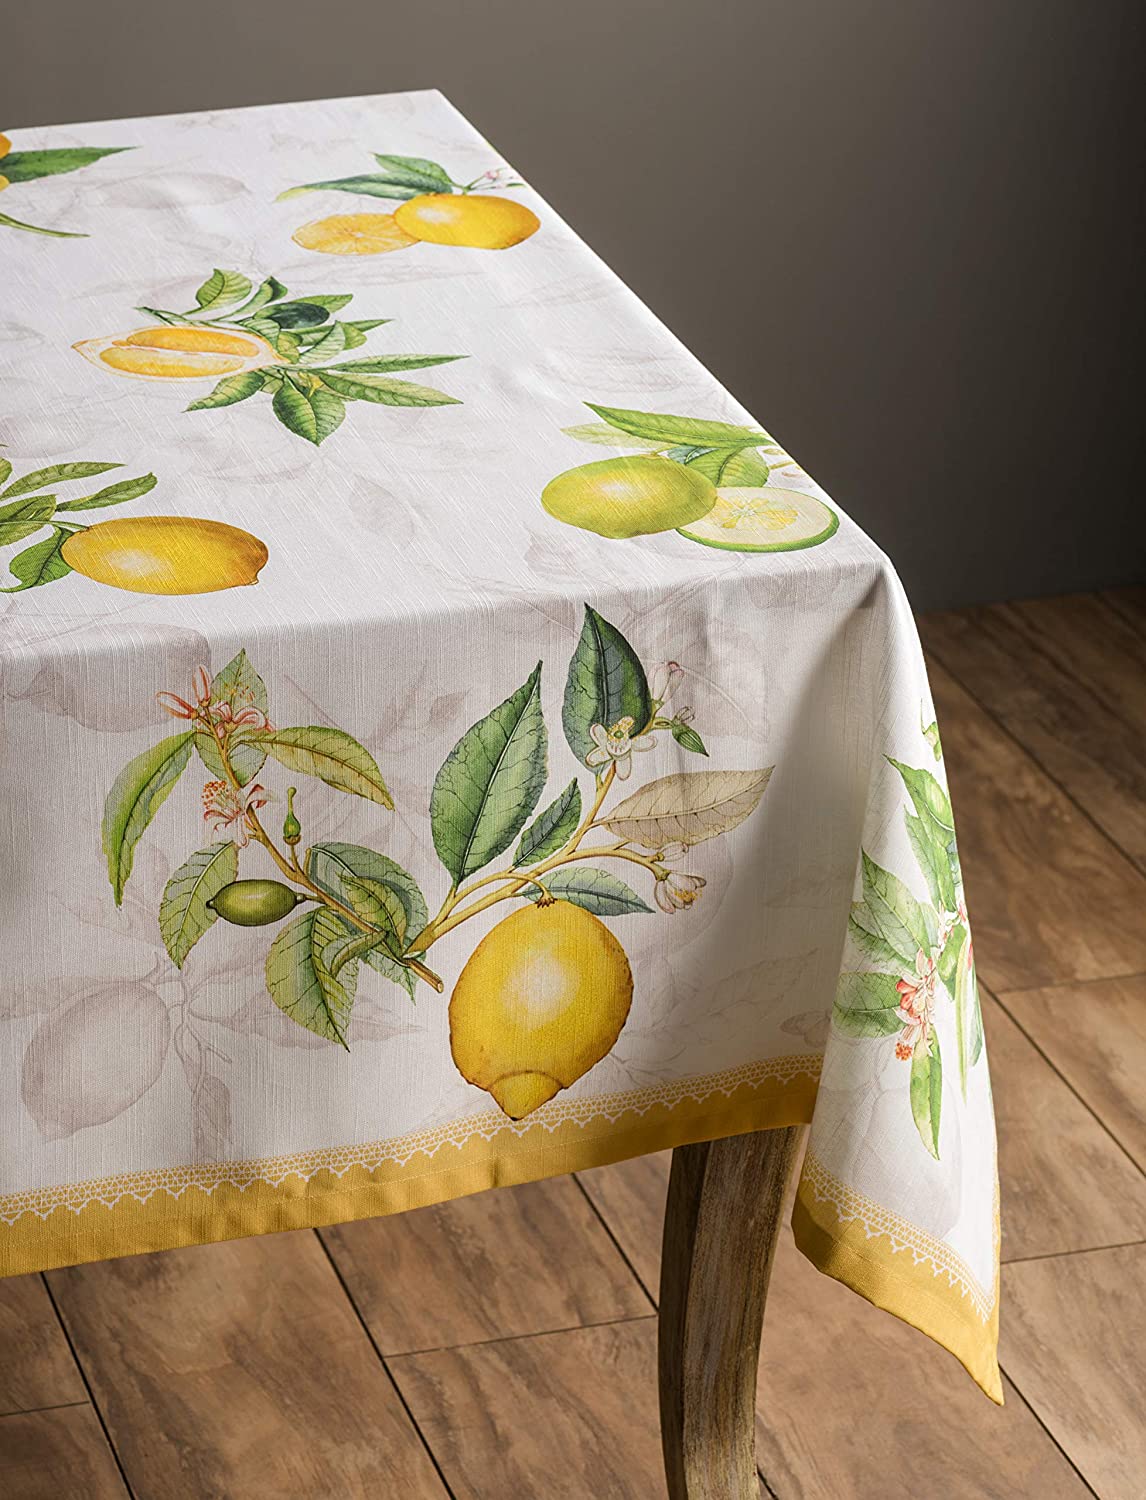 Lemon and Leaves 100% Cotton Tablecloth for Kitchen Dining